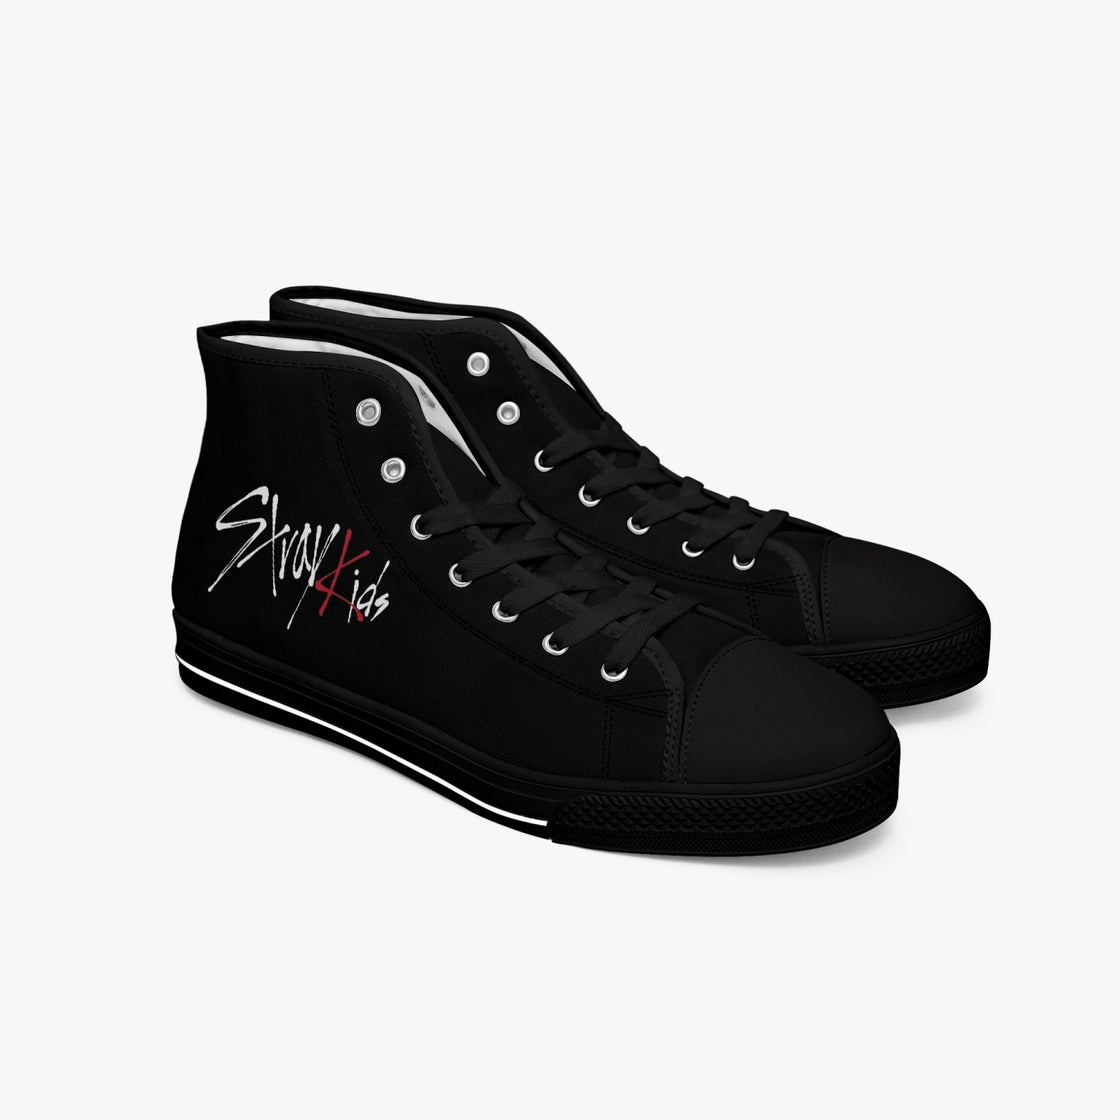 Stray Kids High-top Canvas Shoes